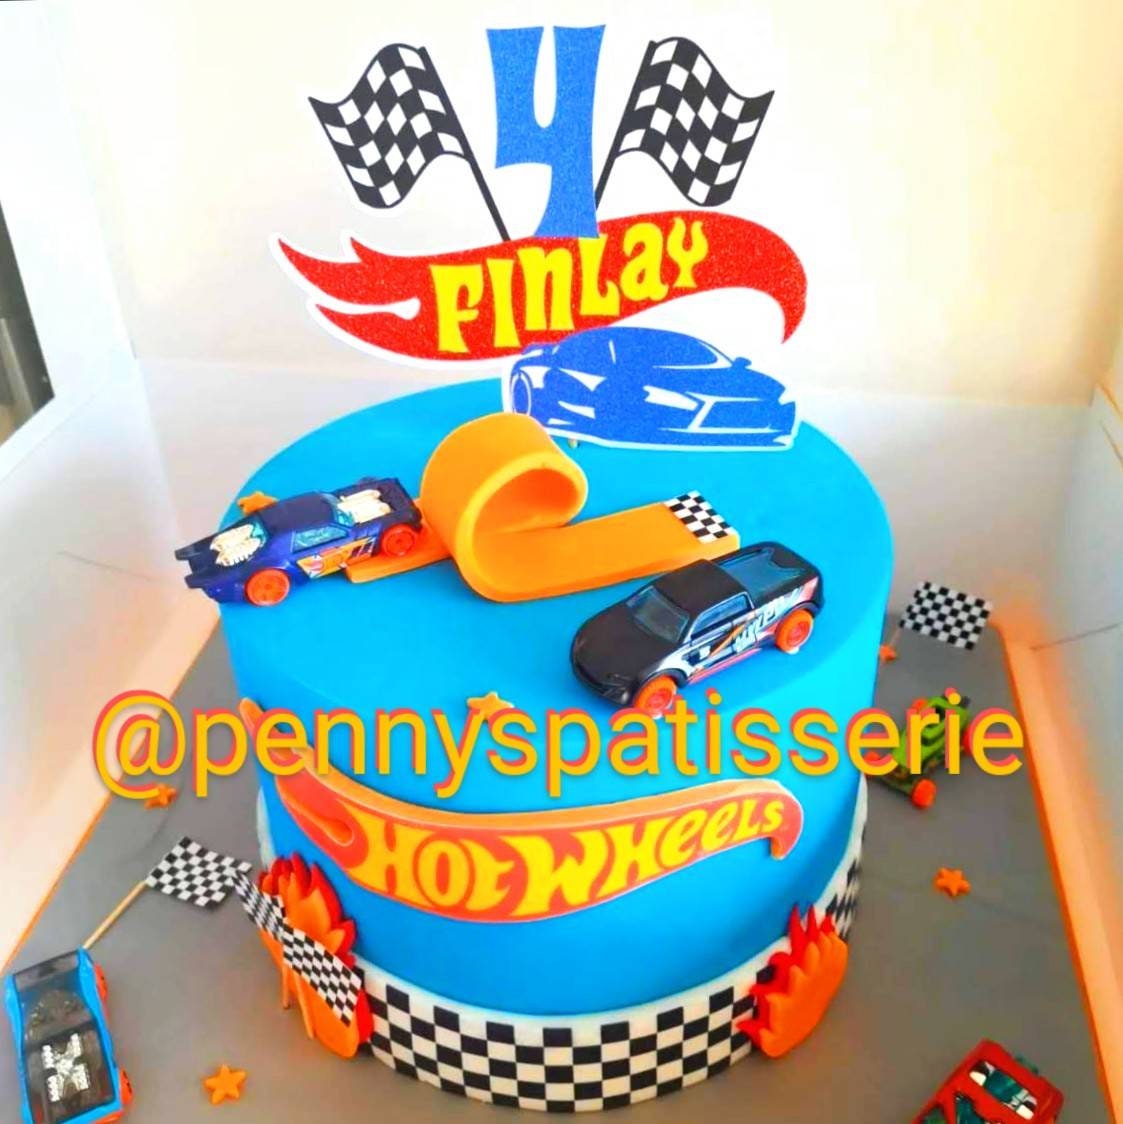 Hotwheels - Decorated Cake by Cakes by Design - CakesDecor